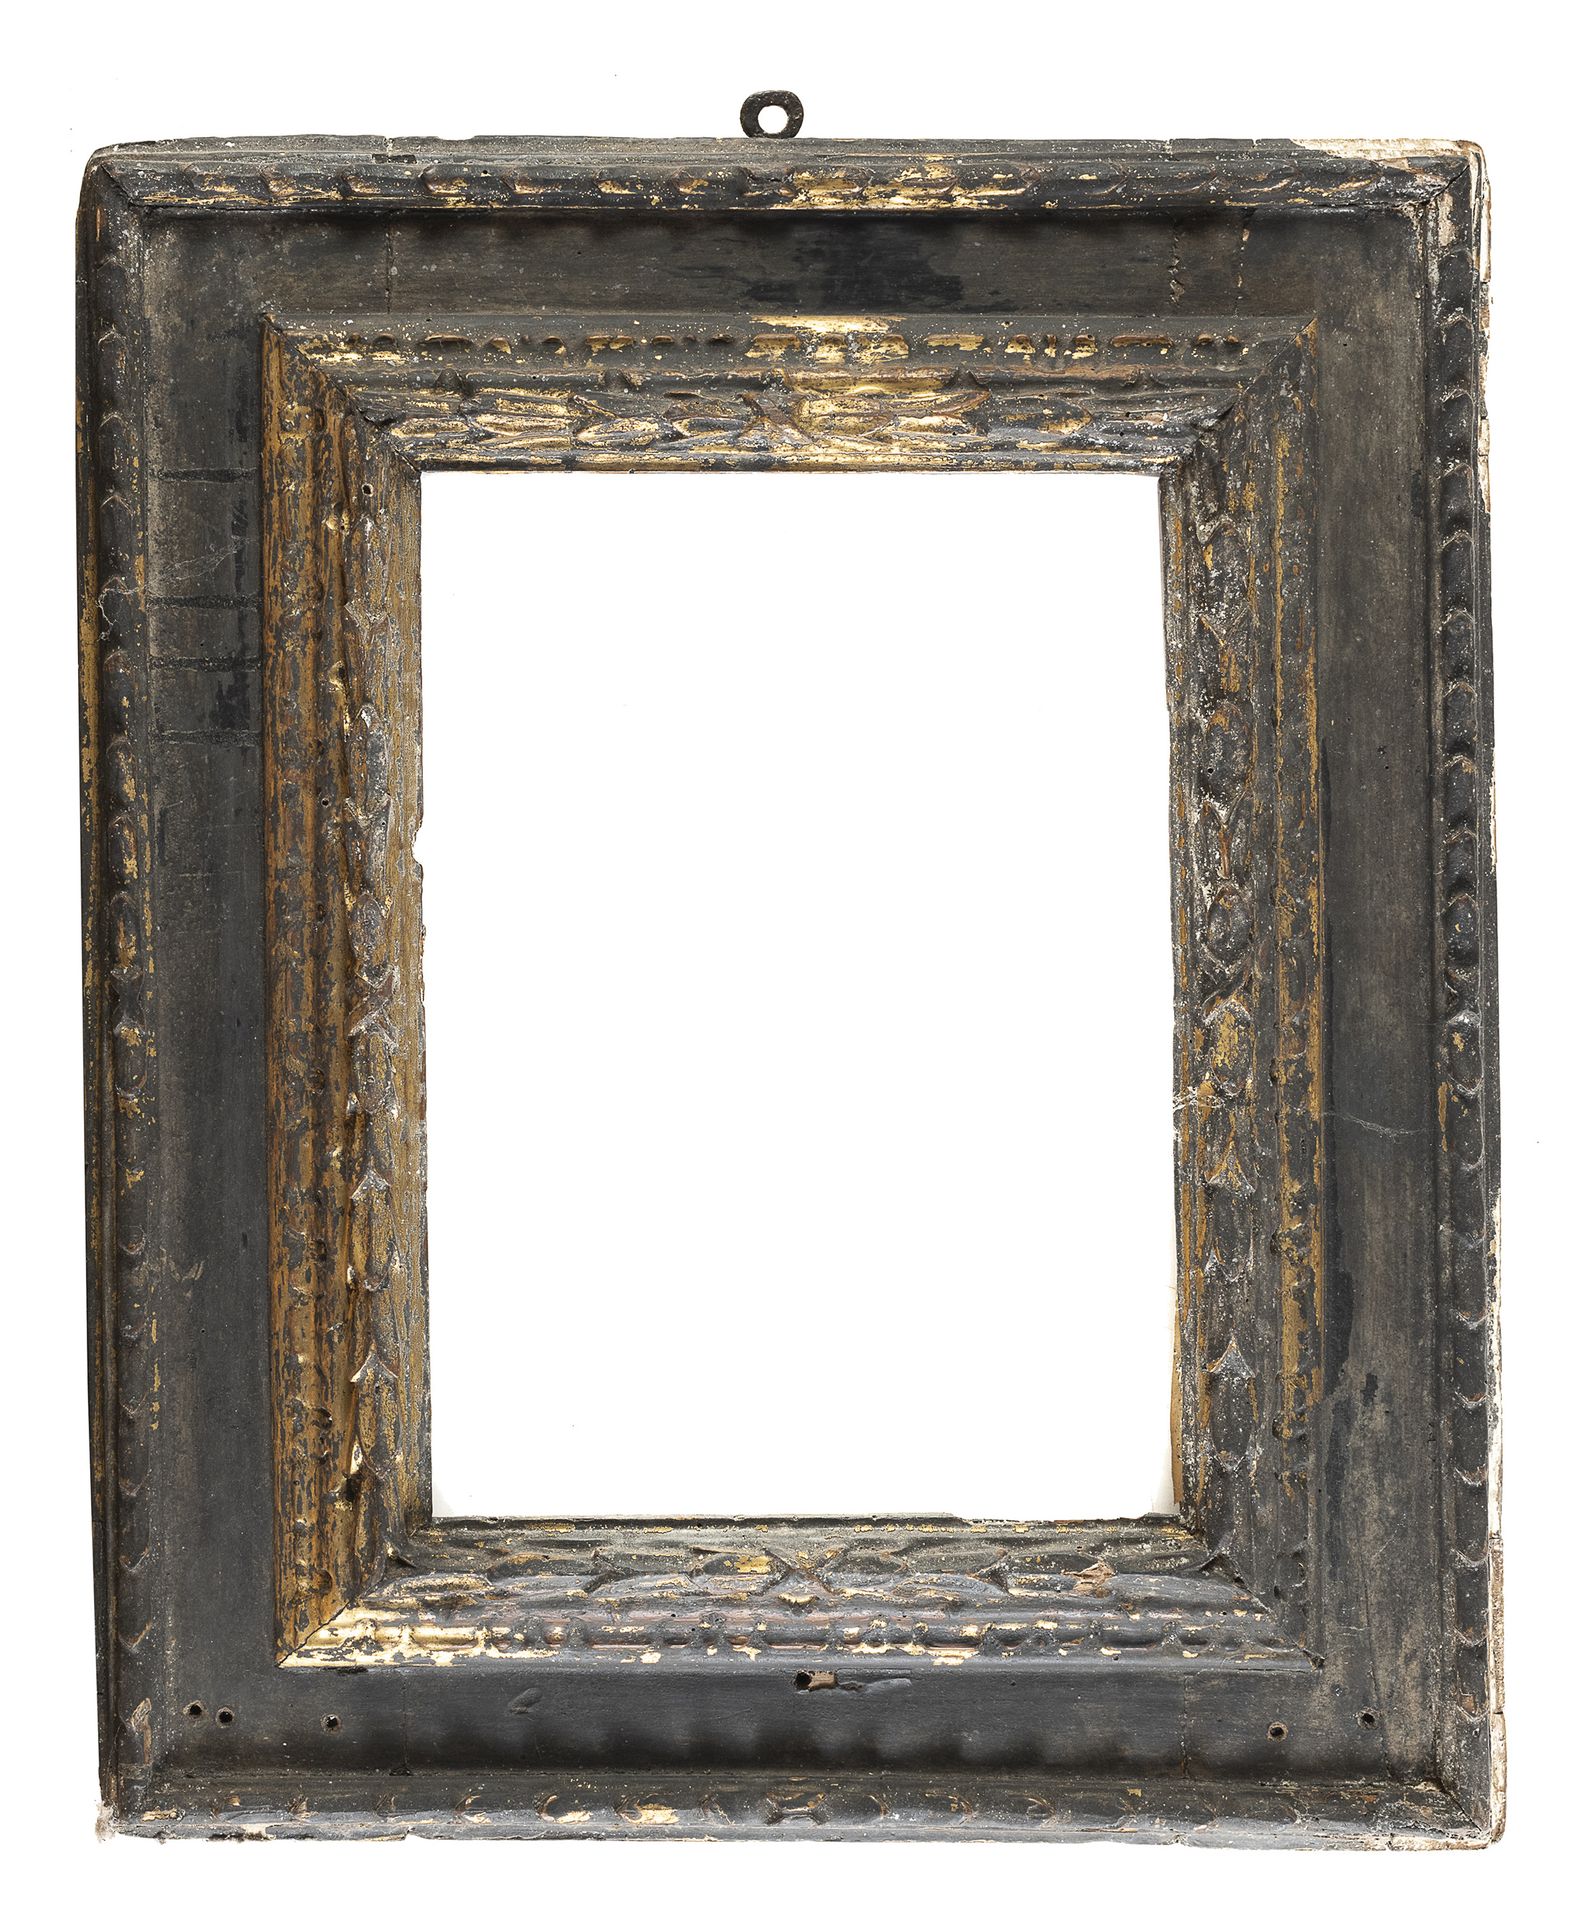 Null BLACK LACQUER WOODEN FRAME, 17th CENTURY